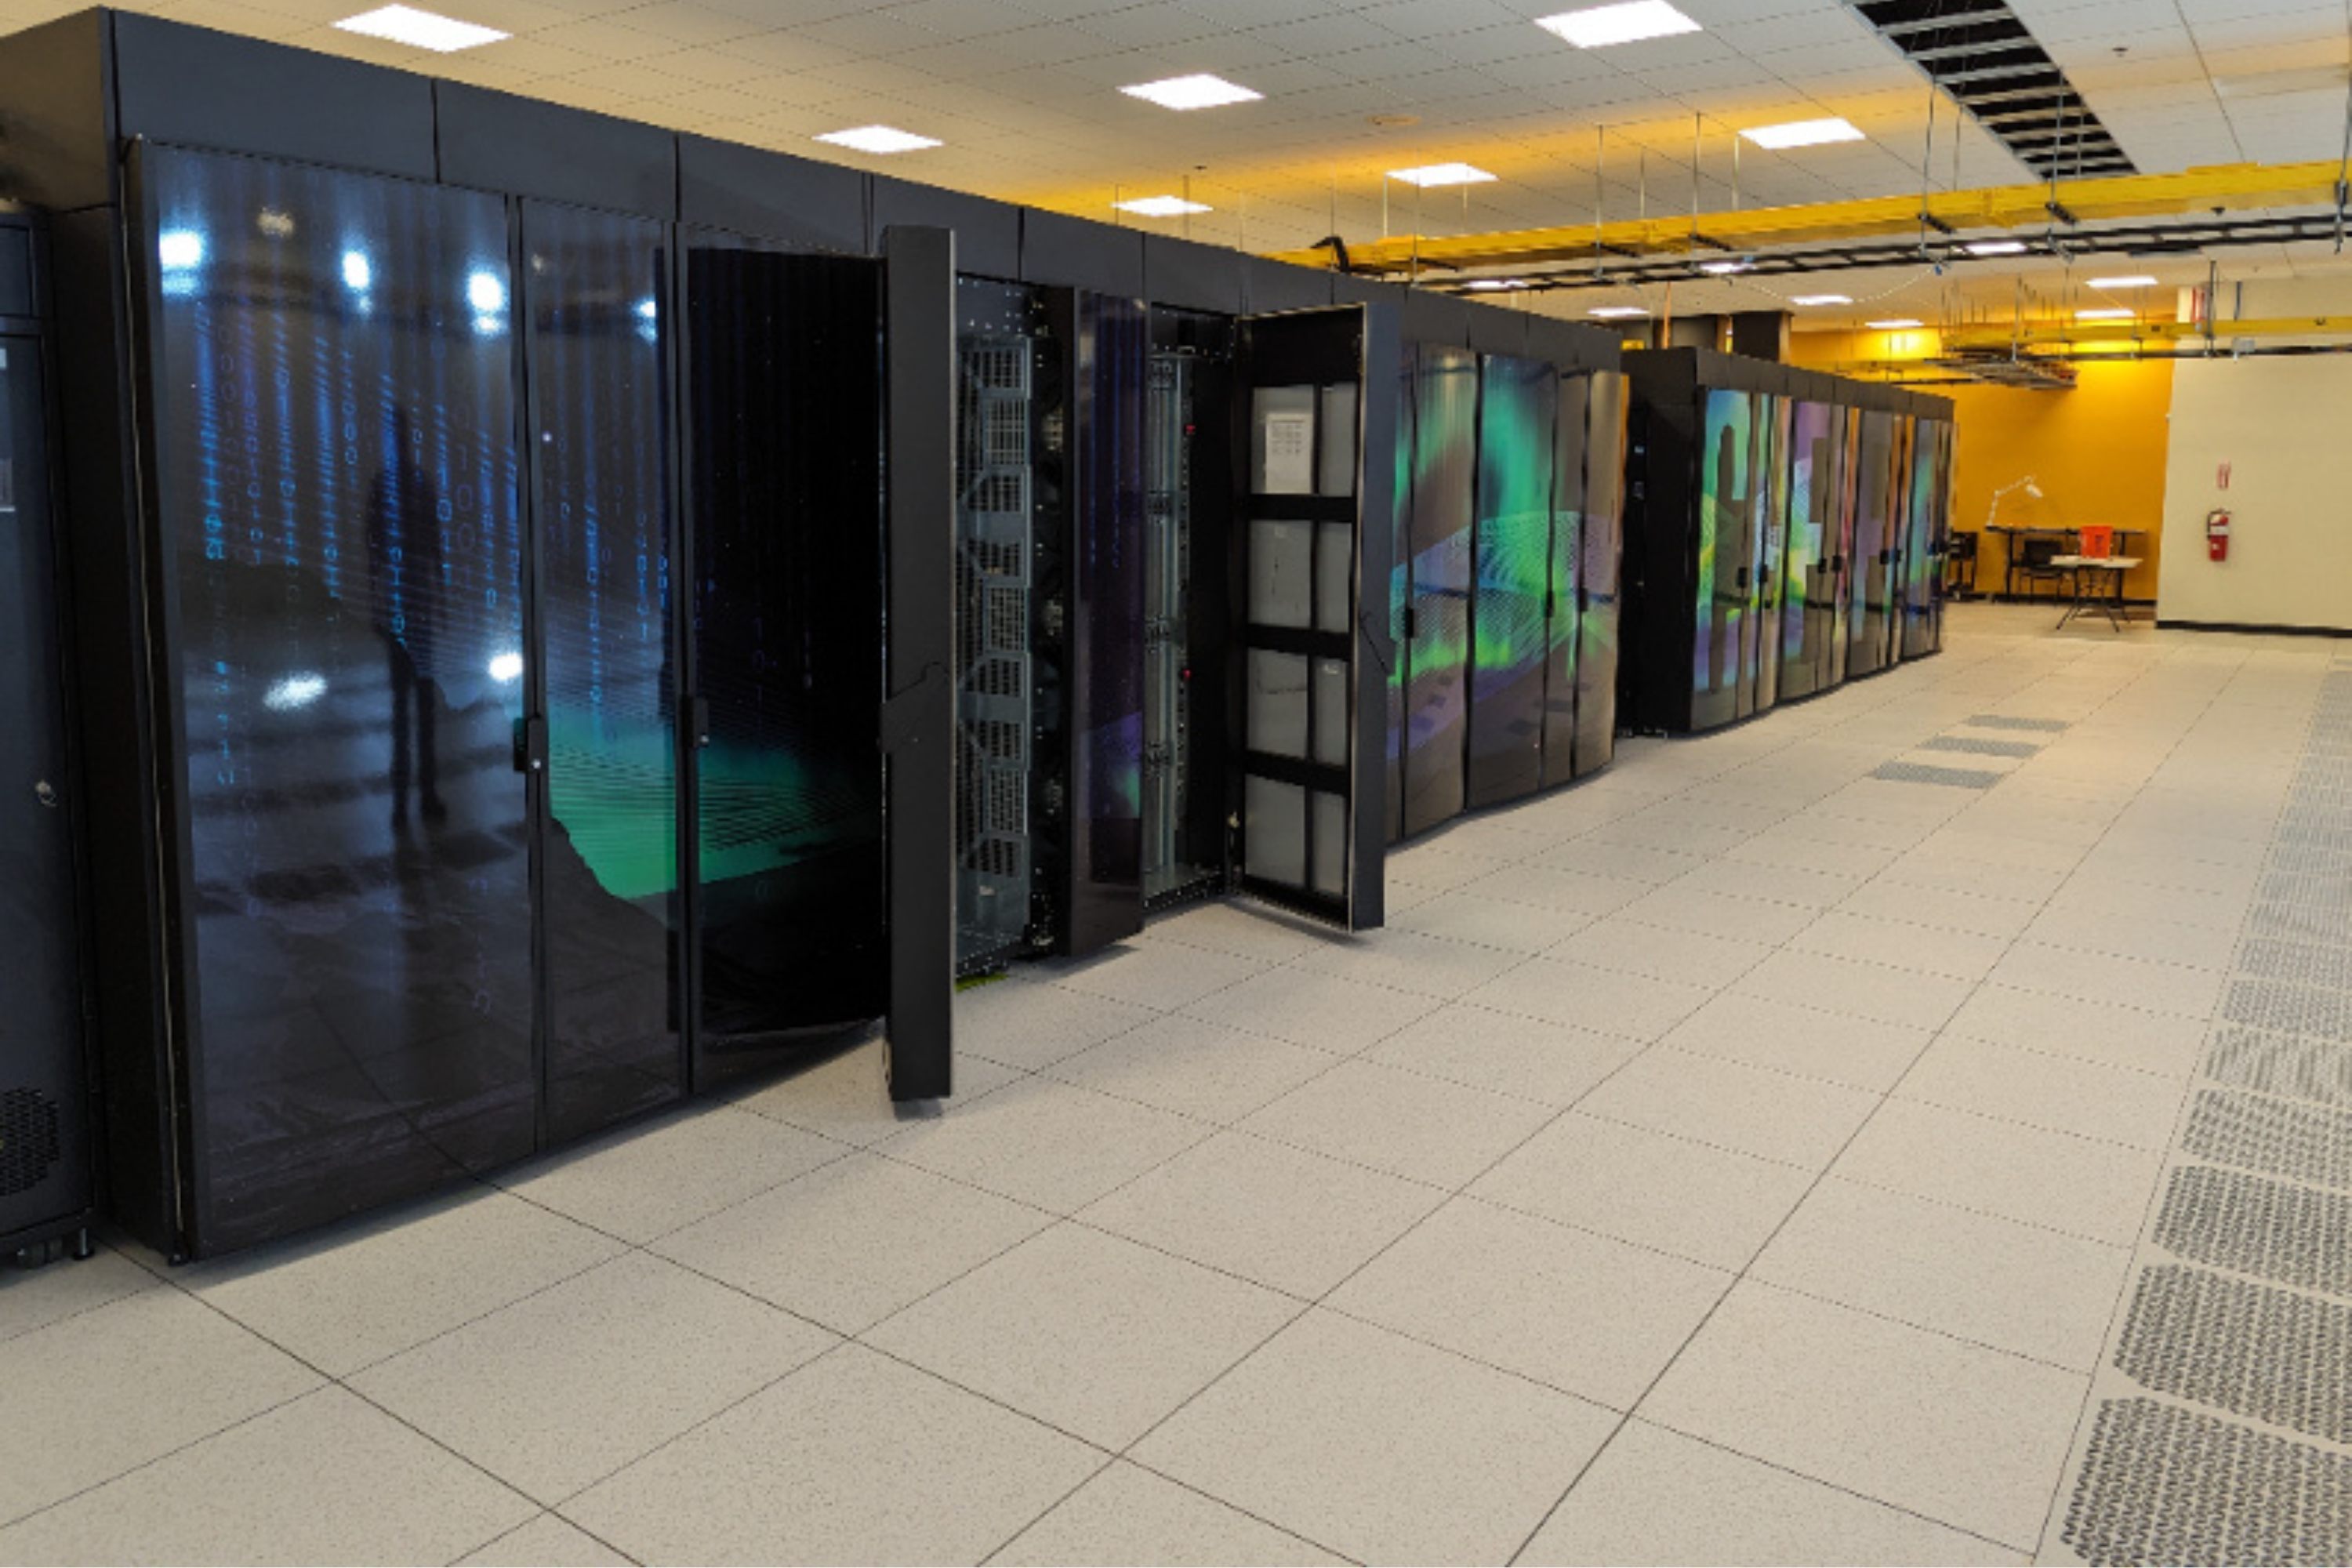 Cheyenne supercomputer is now up for auction